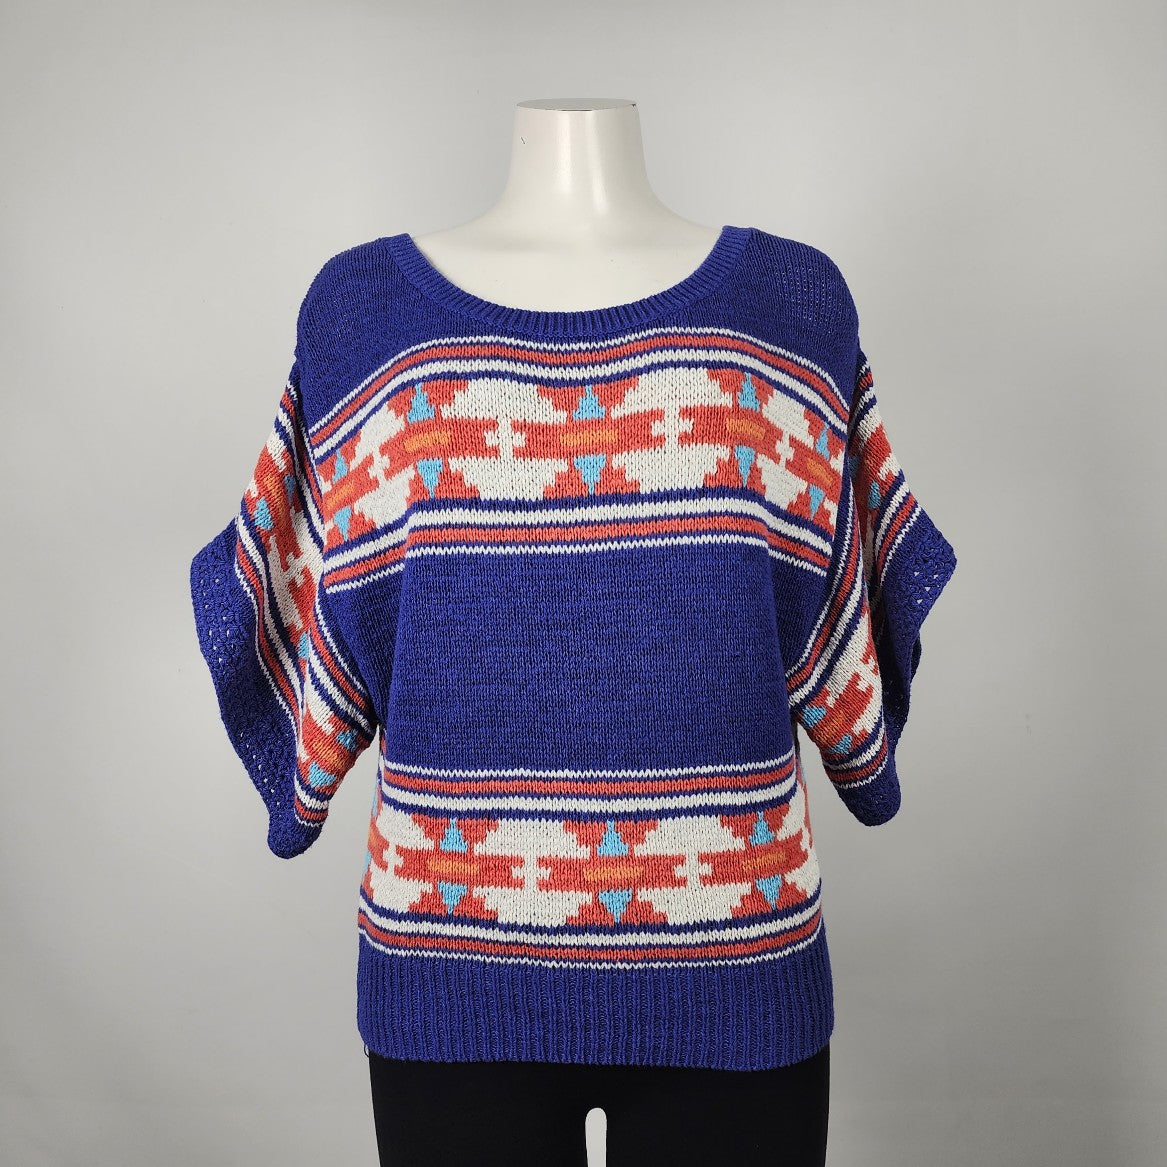 American Eagle Outfitter Blue & Red Cotton Blend Knit Sweater Size M/L